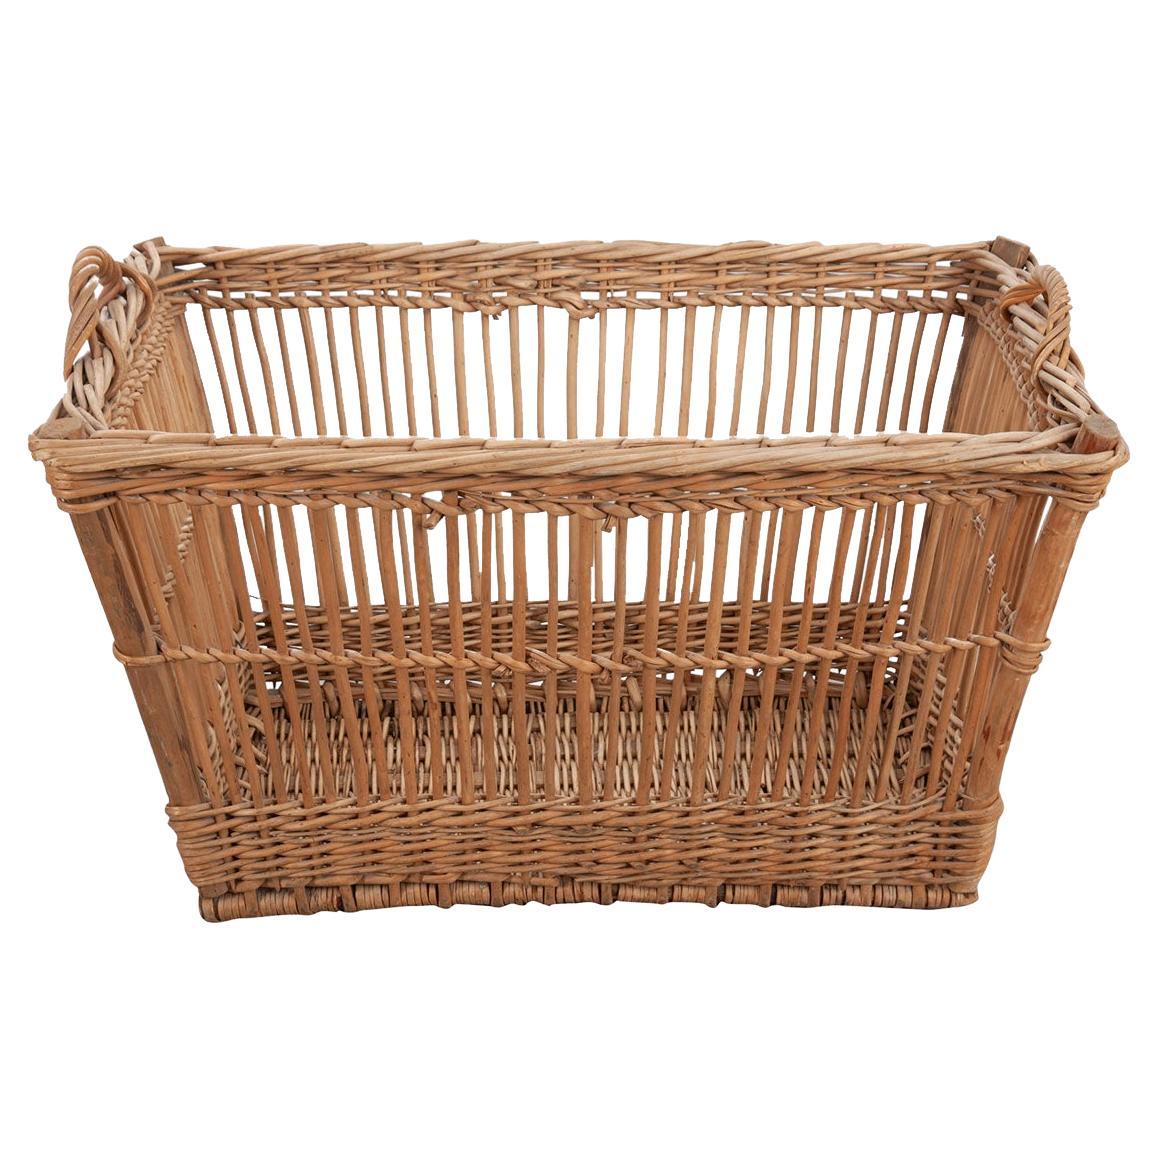 Large French Wicker Basket